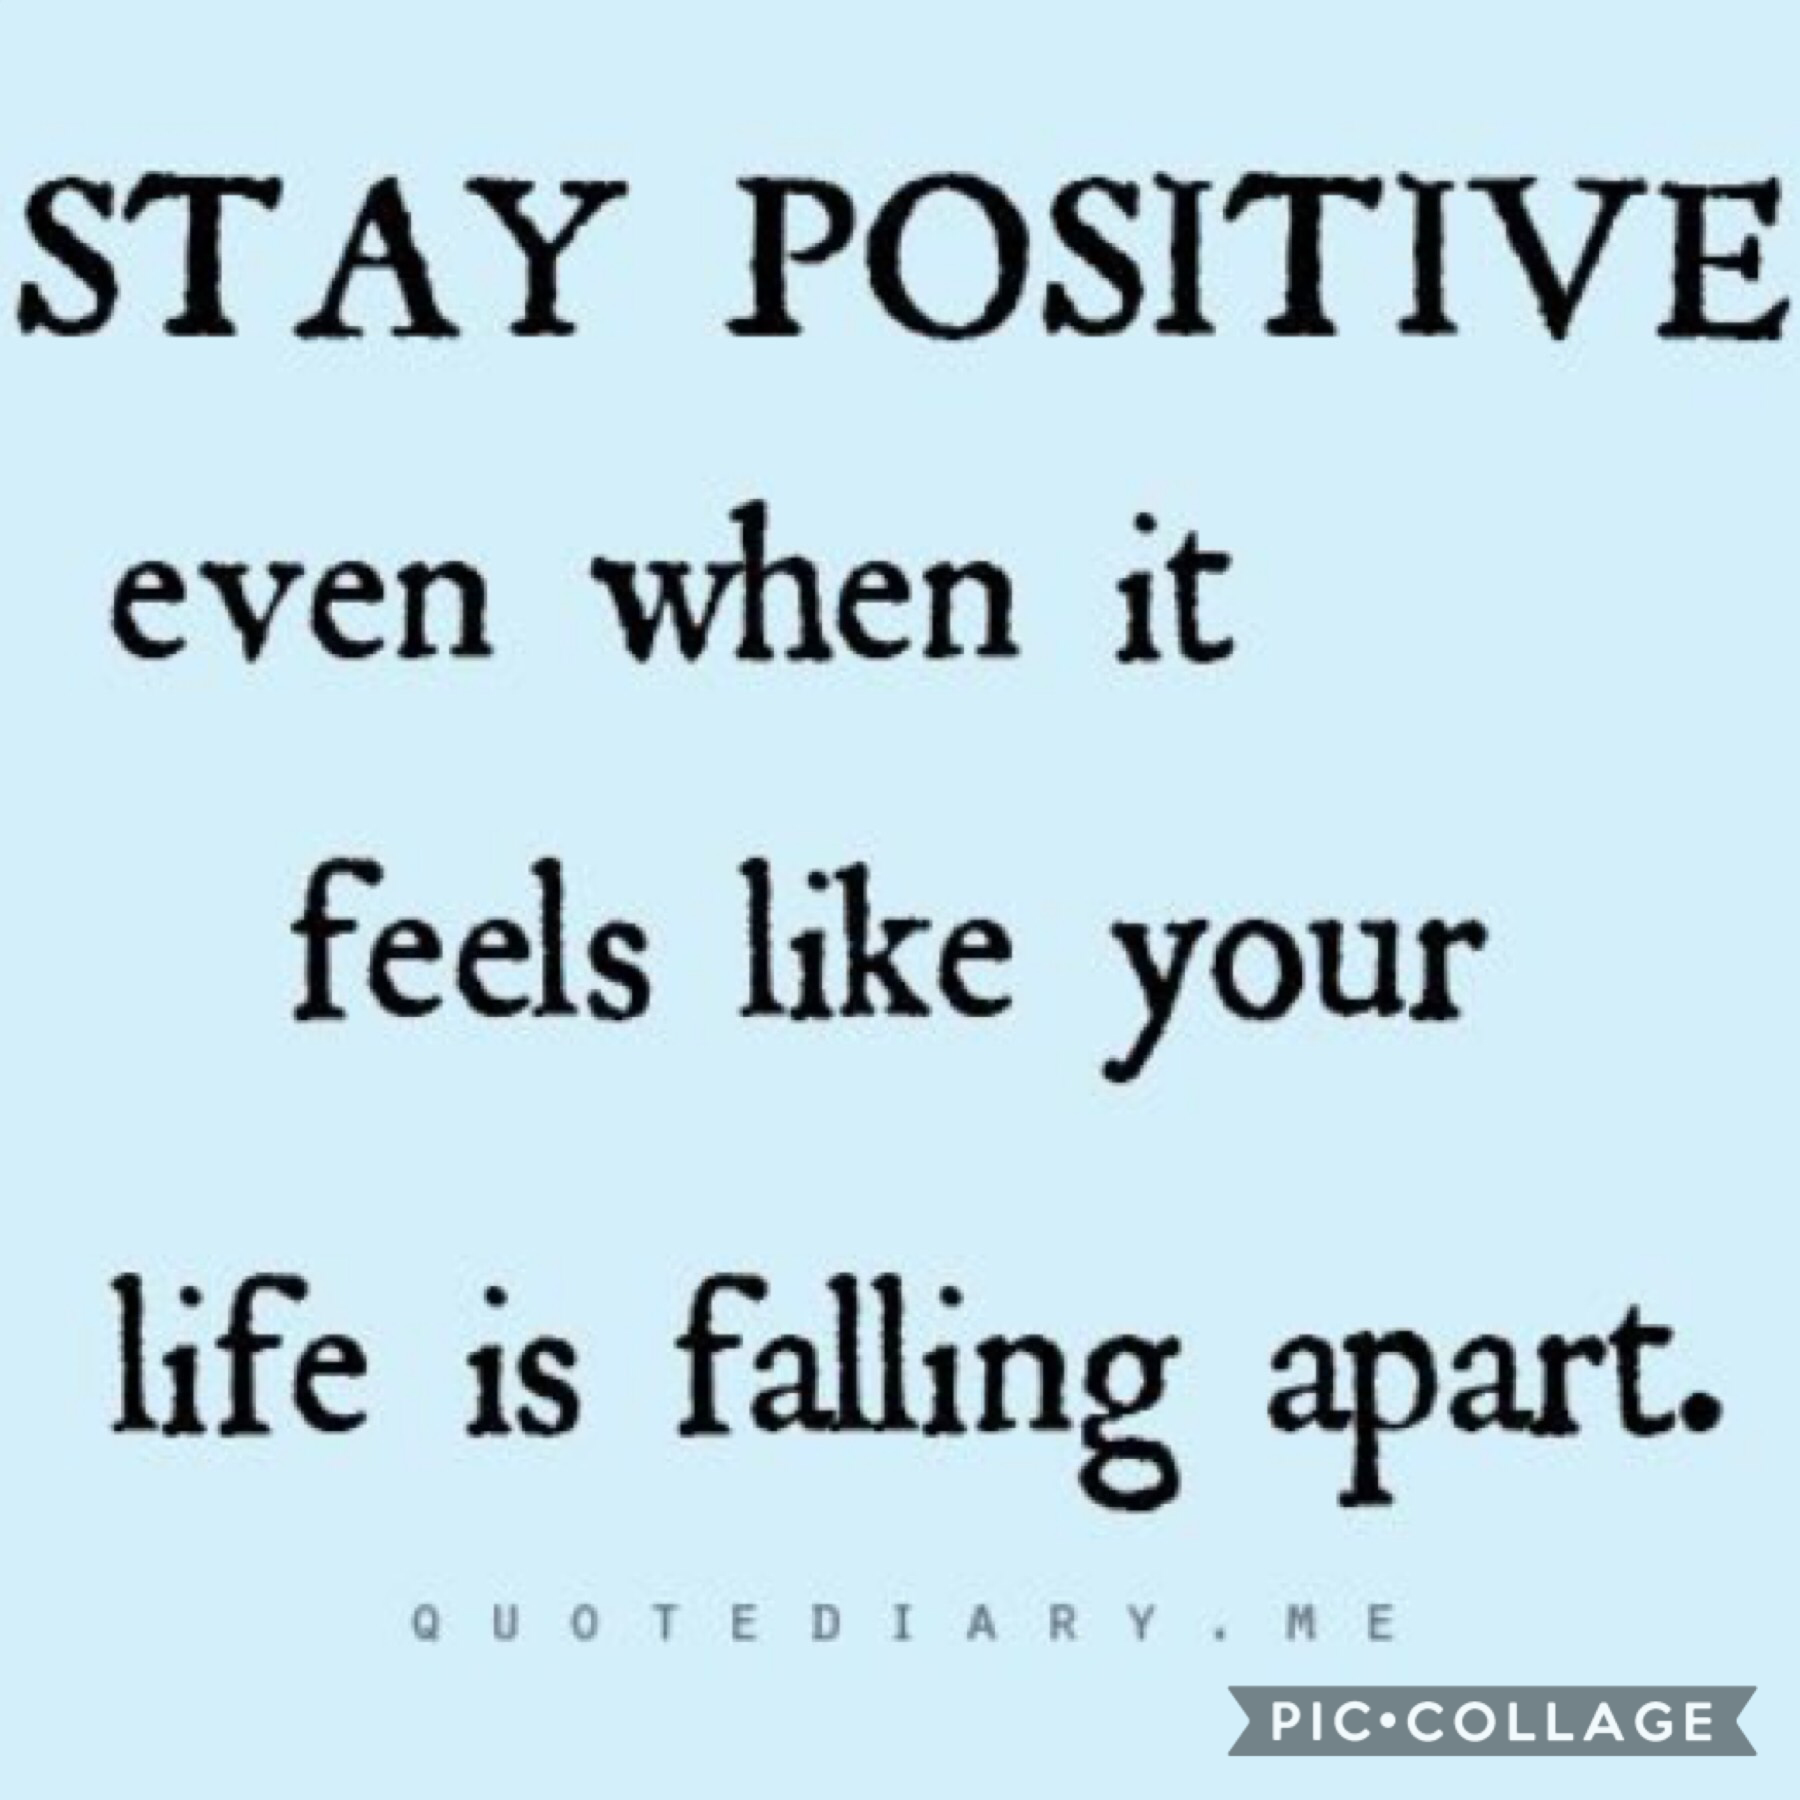  stay positive